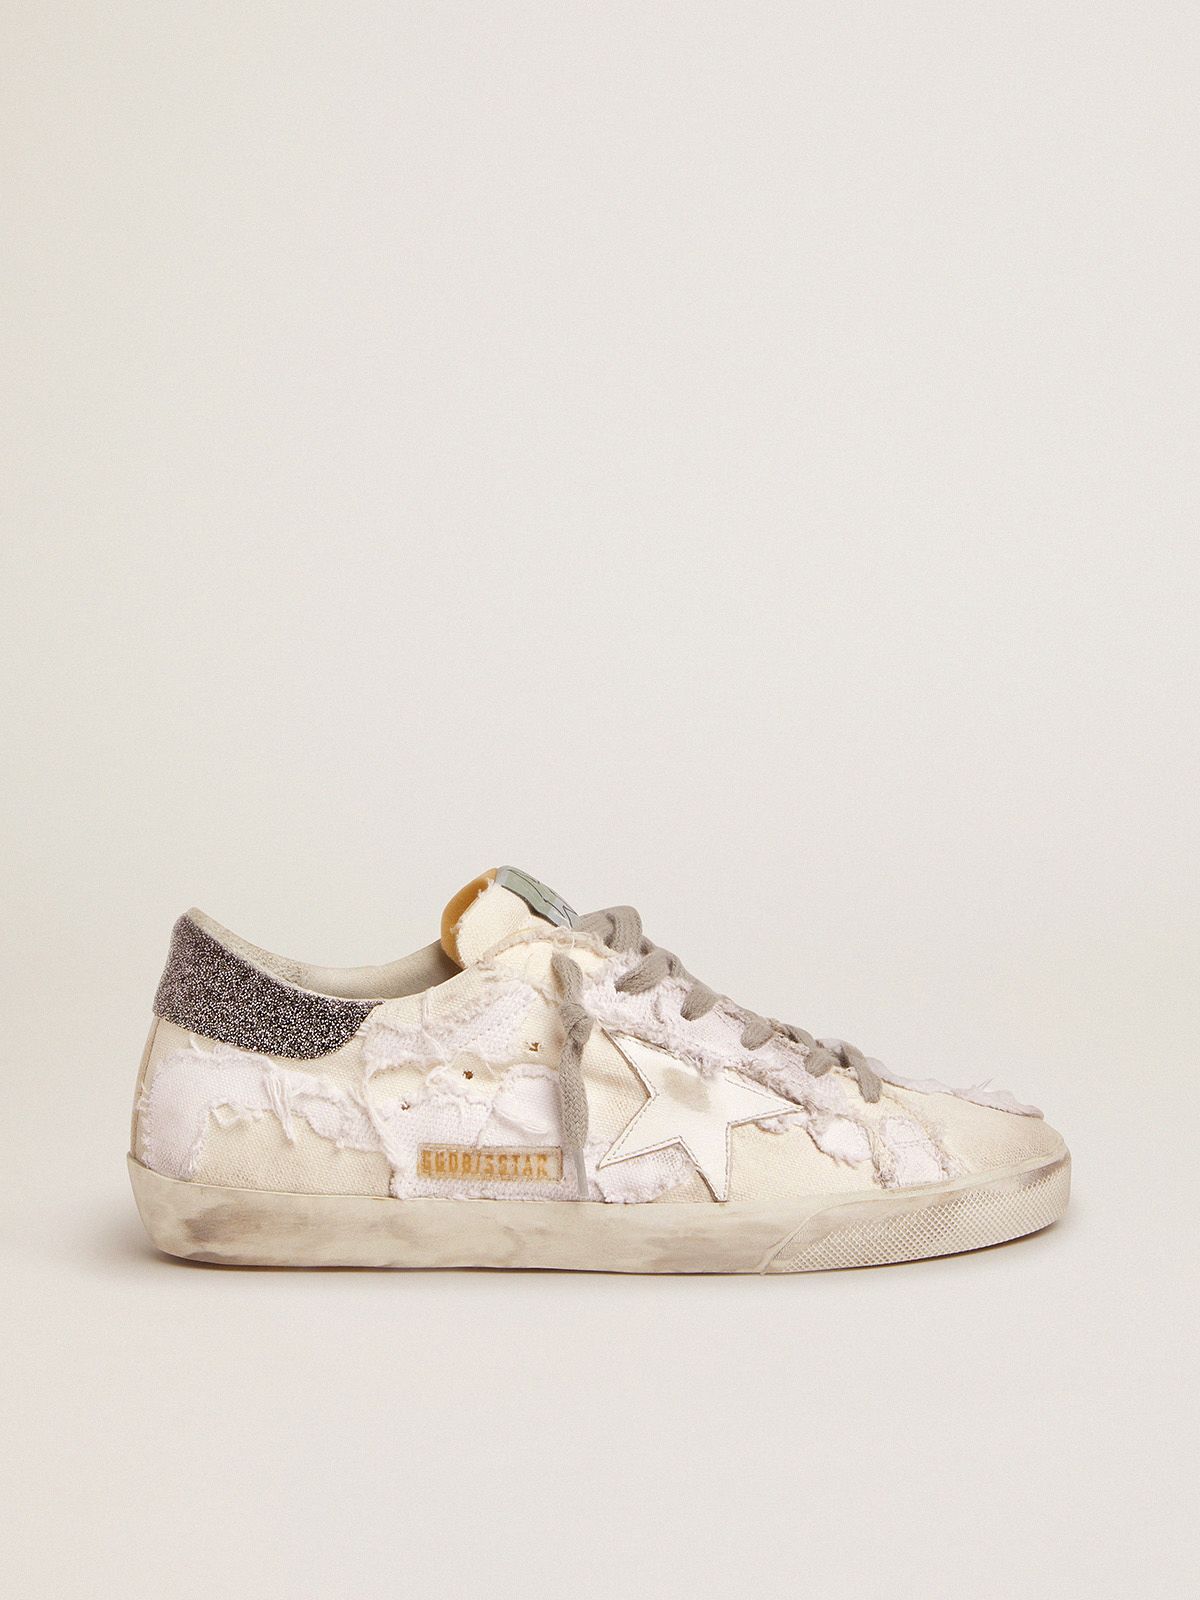 golden goose crystal black Super-Star canvas sneakers in white tab Swarovski heel with